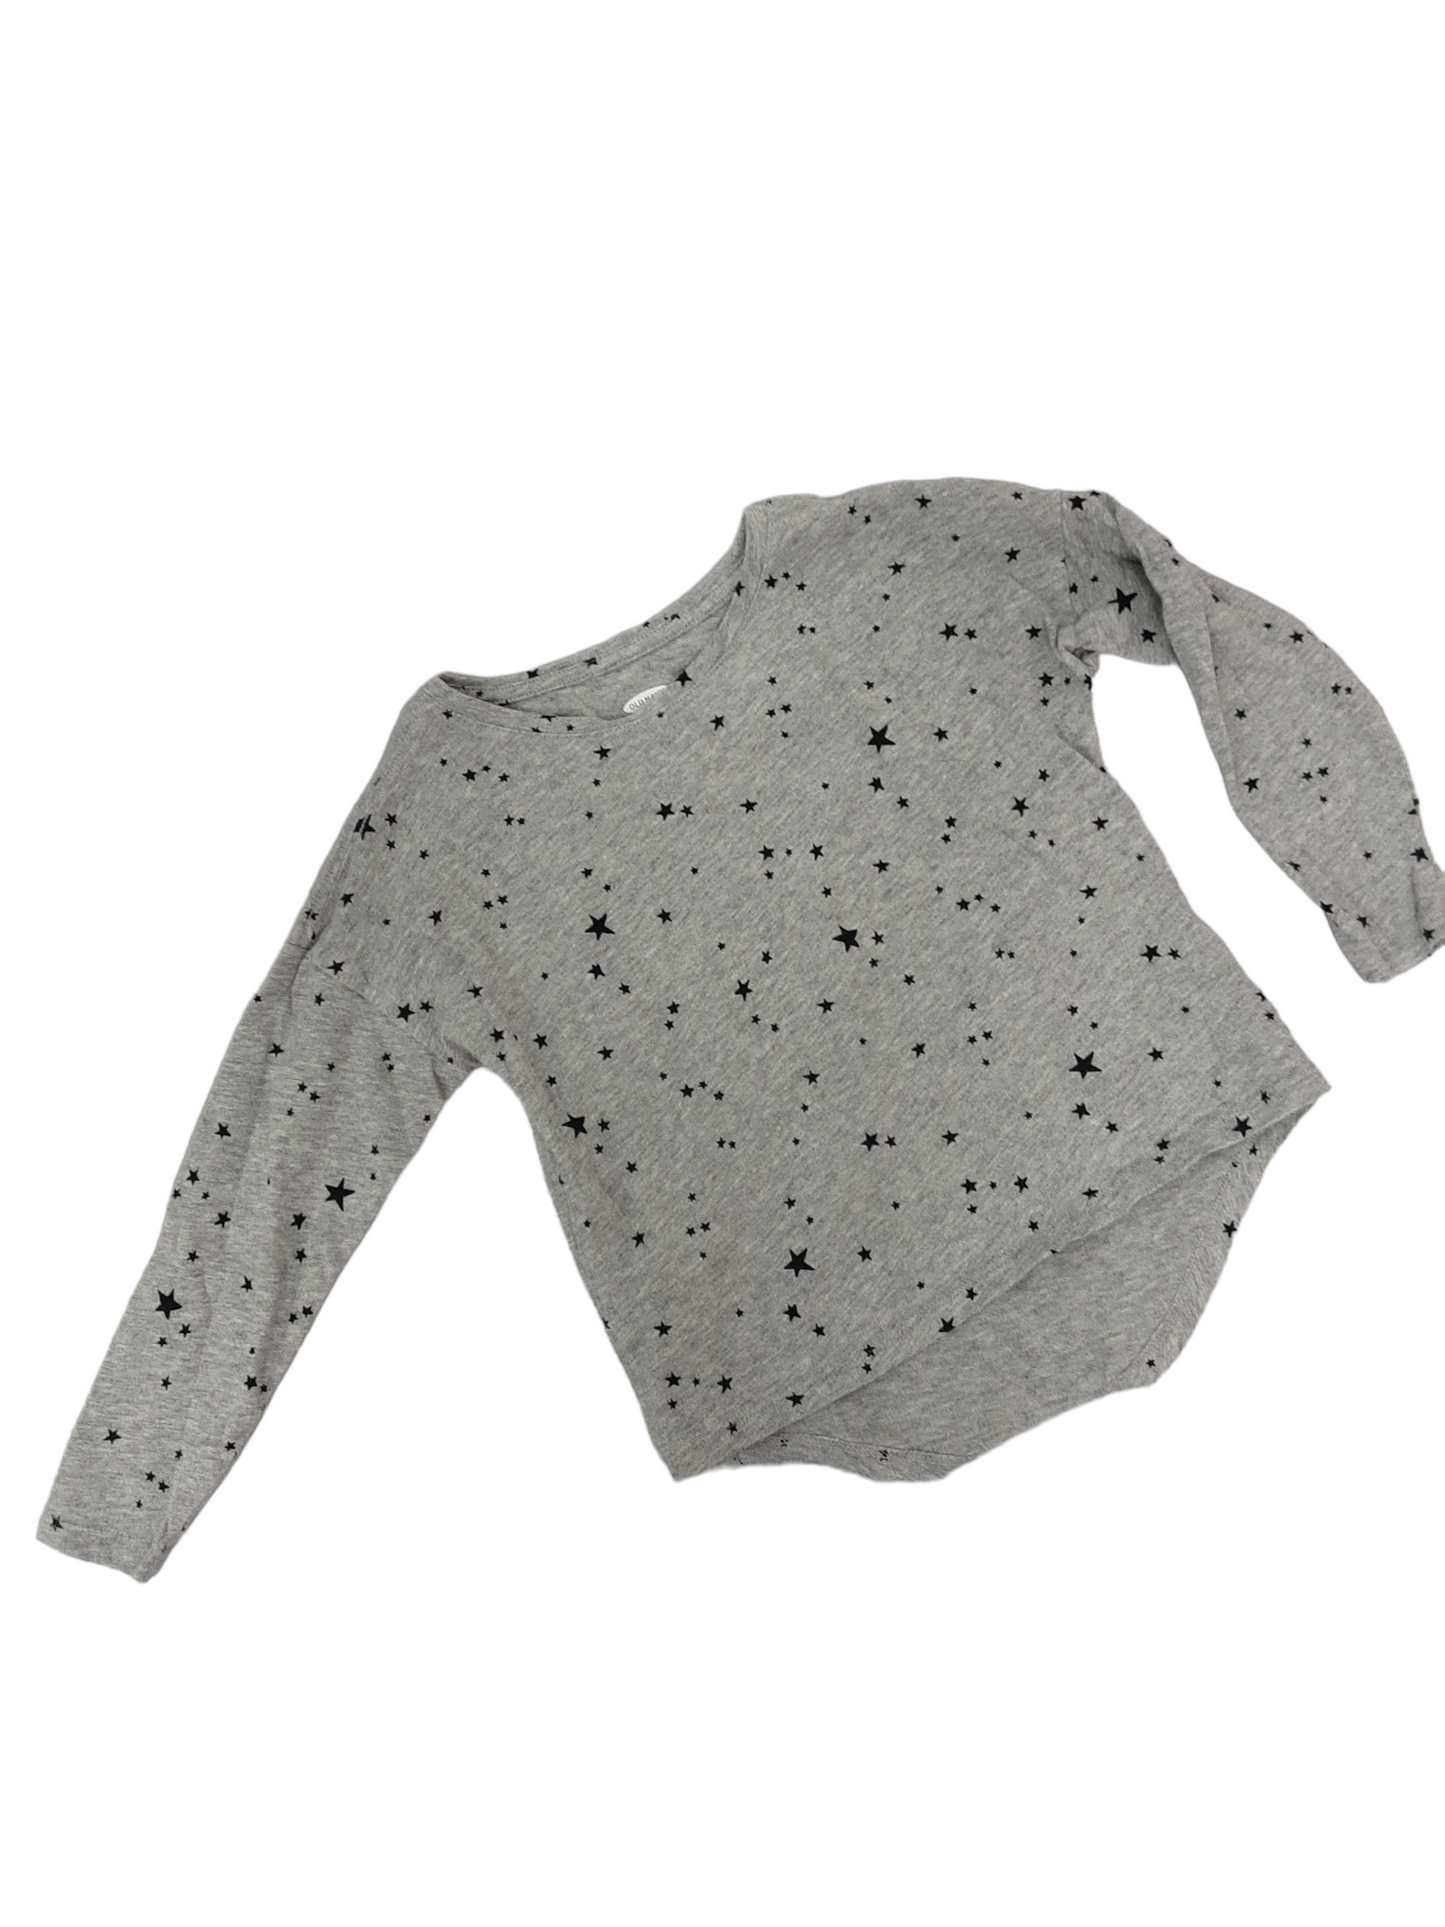 Starry long sleeve size 5